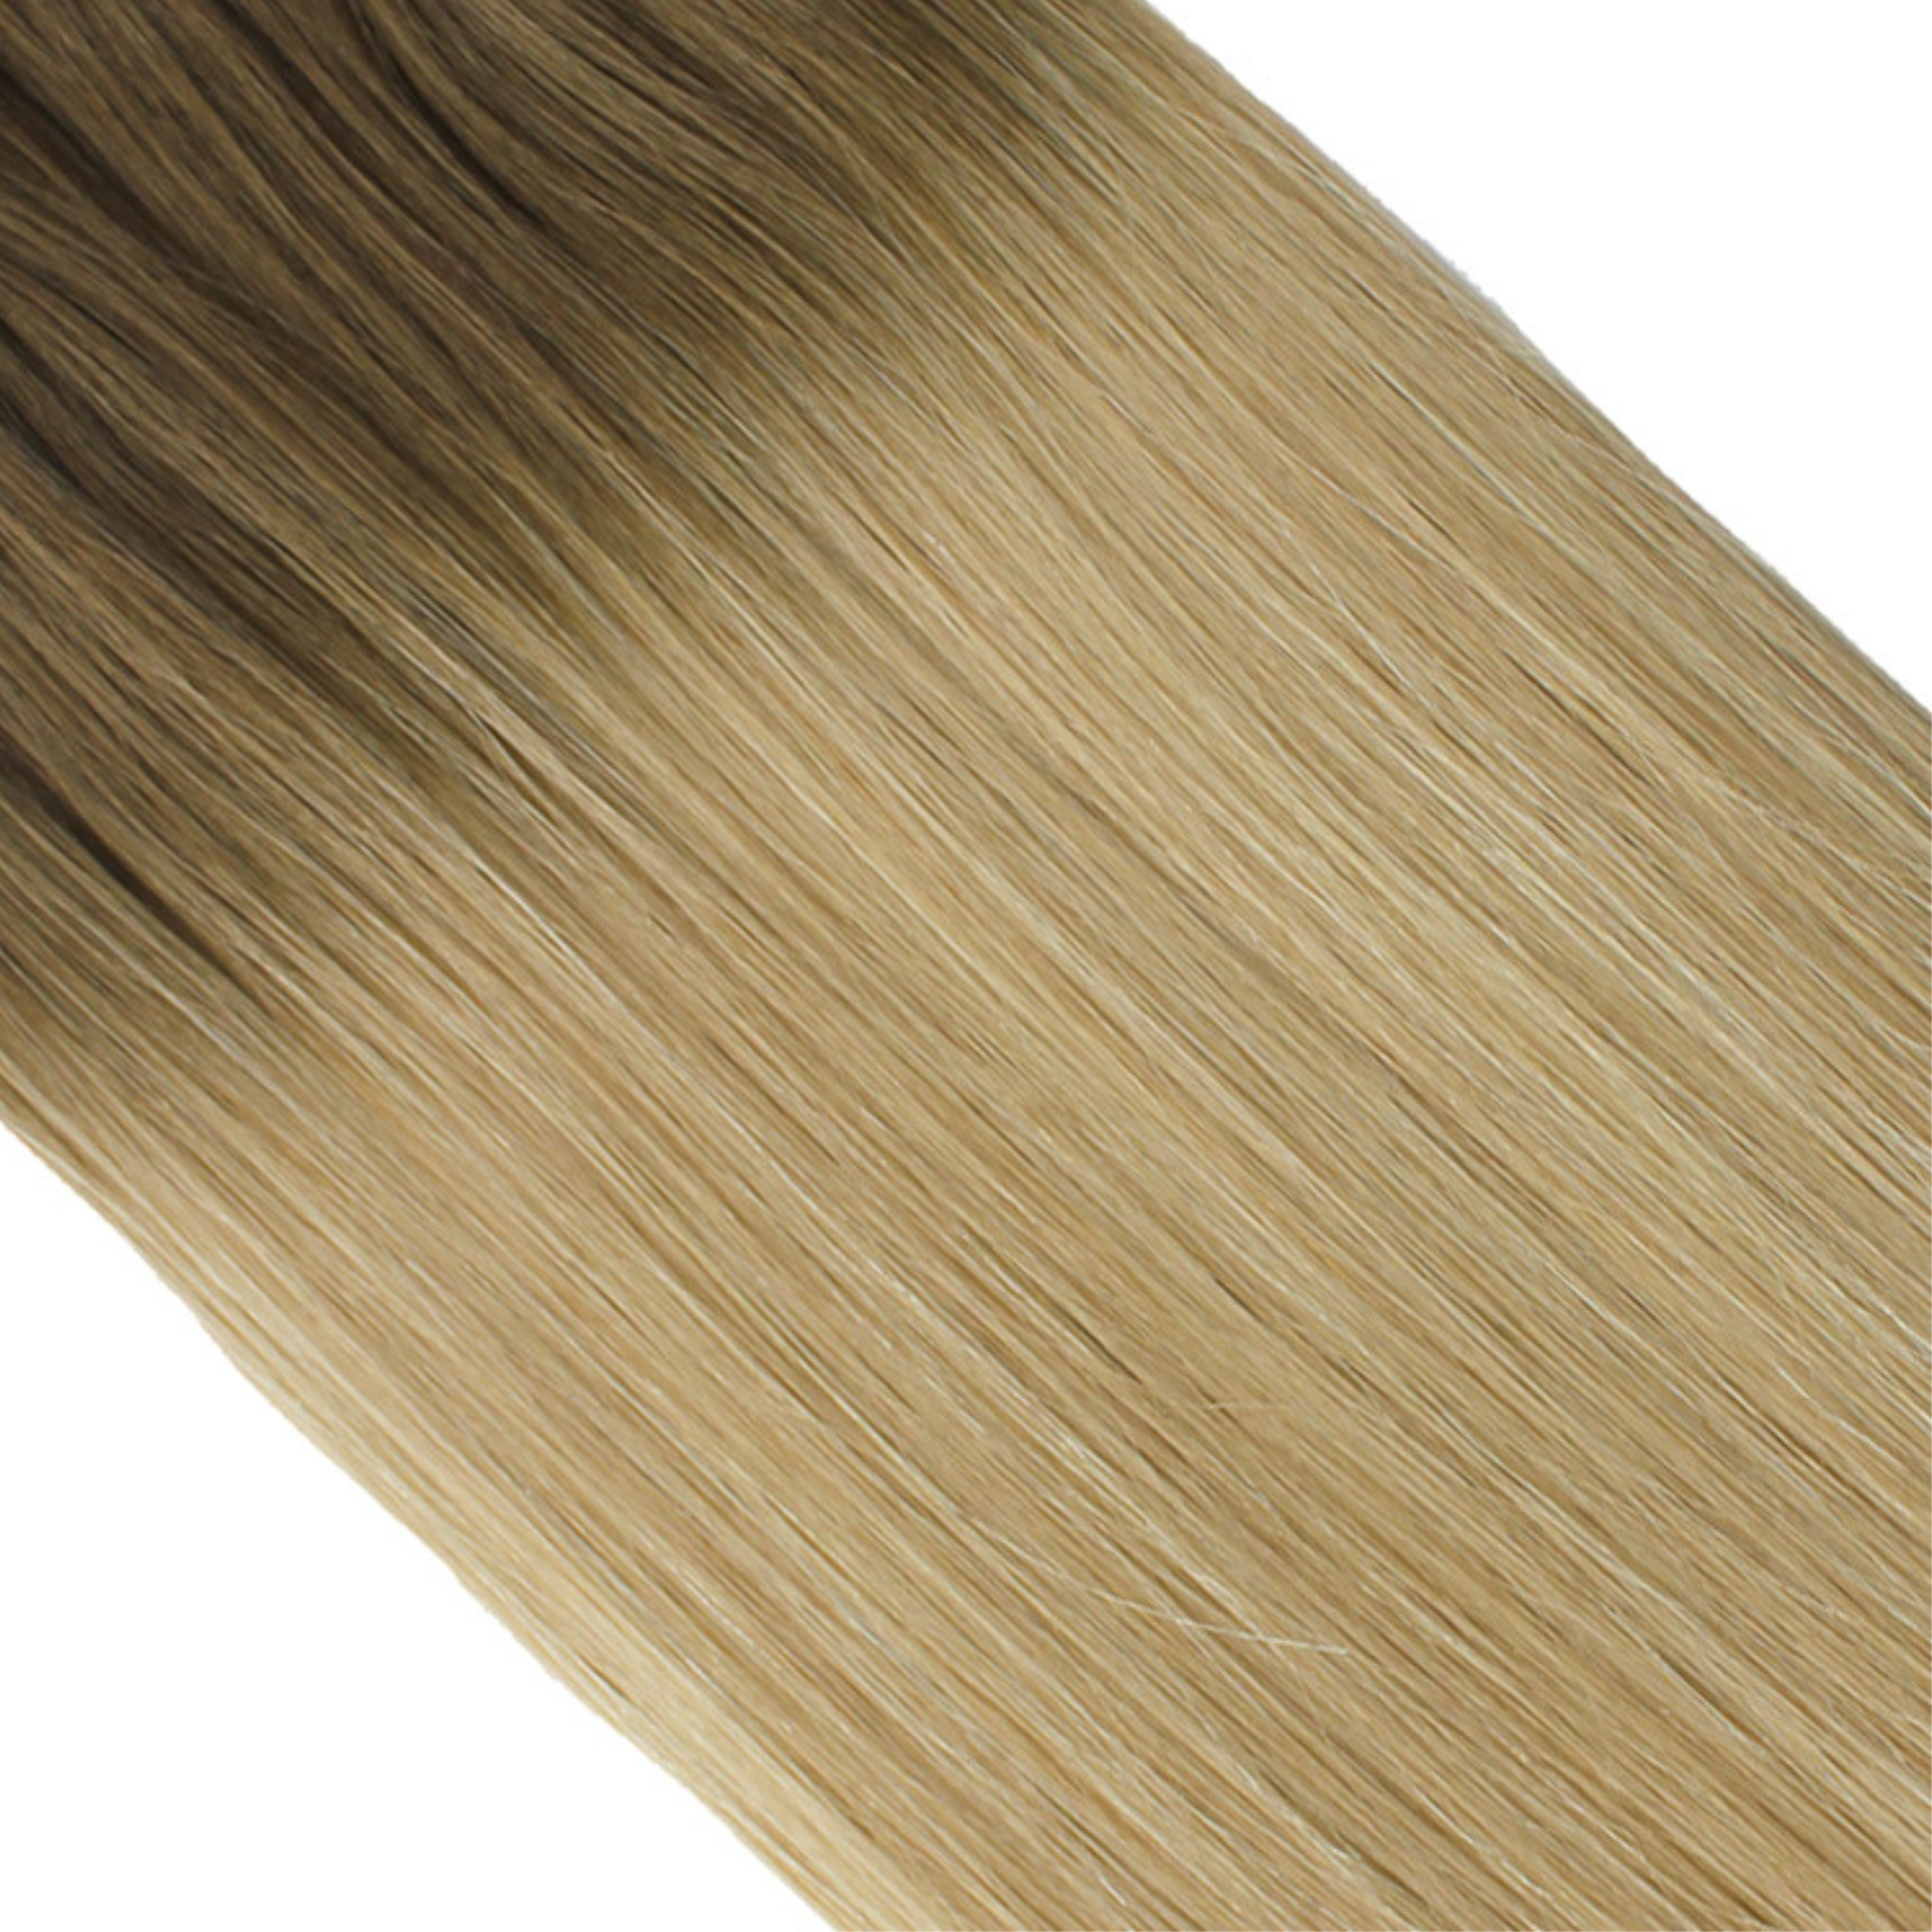 "hair rehab london 18" tape hair extensions shade swatch titled rooted dirty blonde"